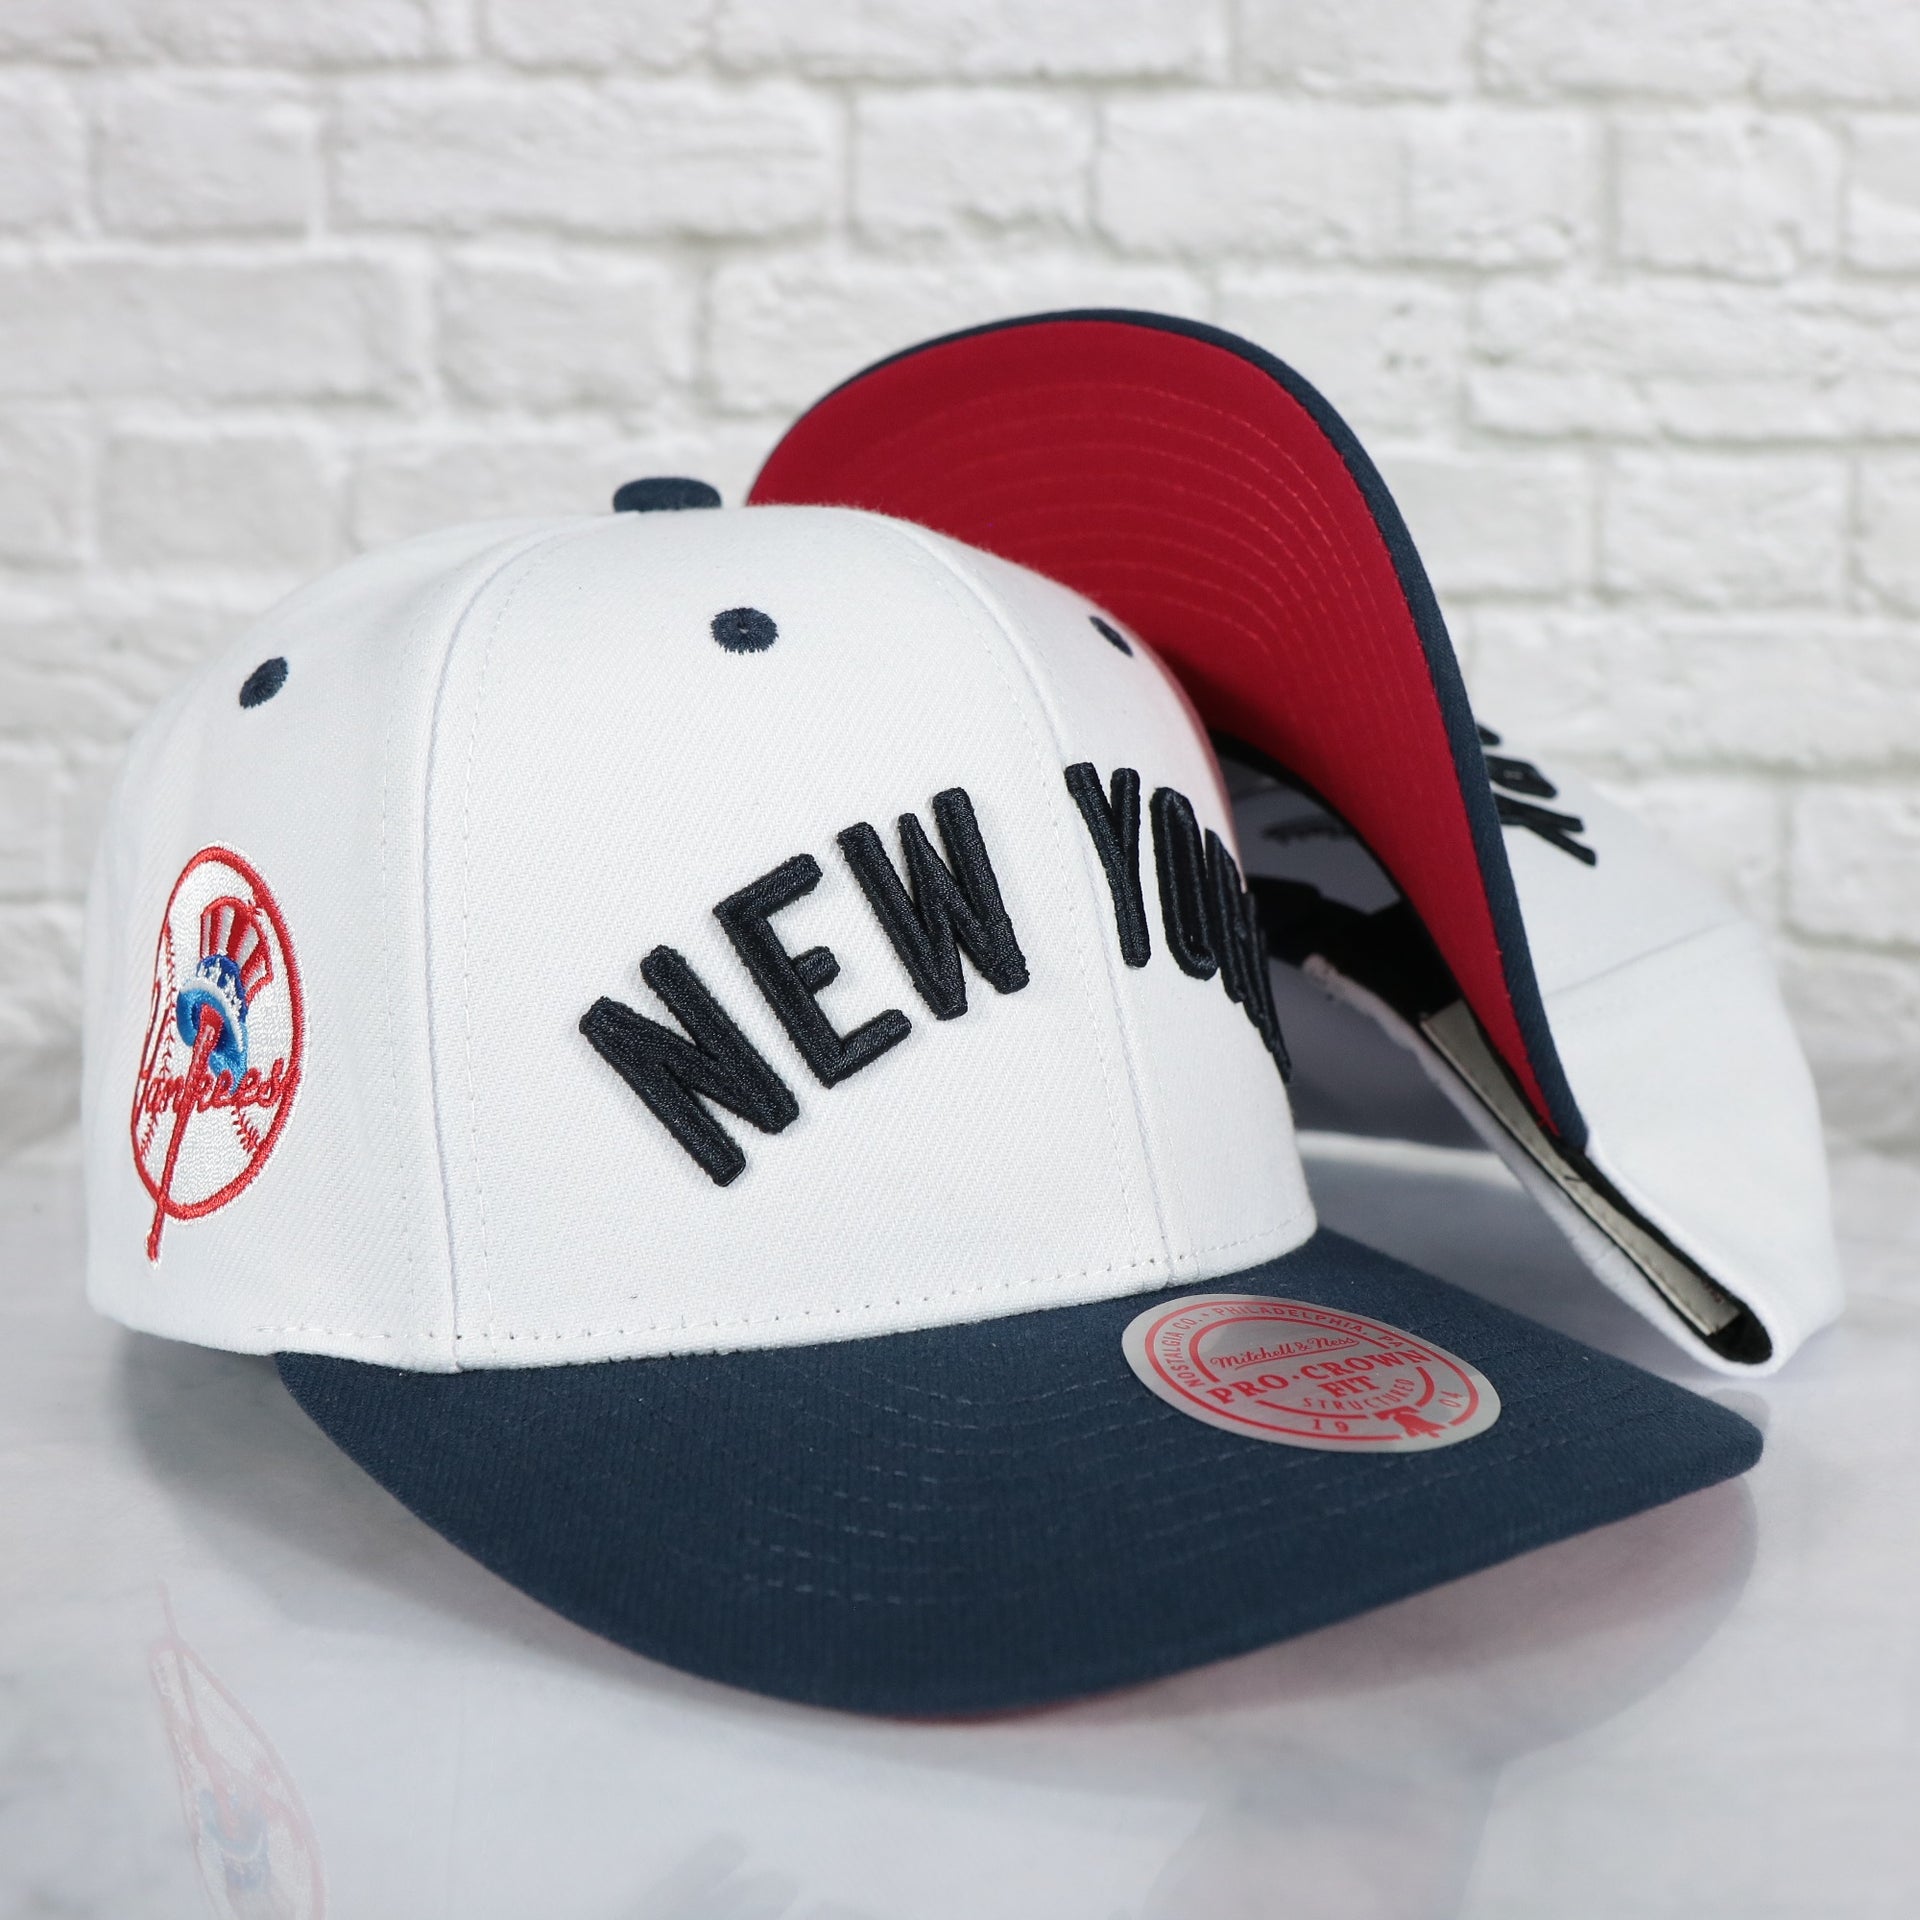 New York Yankees Cooperstown "New York" Jersey Script 1947 Yankees logo side patch Evergreen Pro | White/Navy Snapback Hat